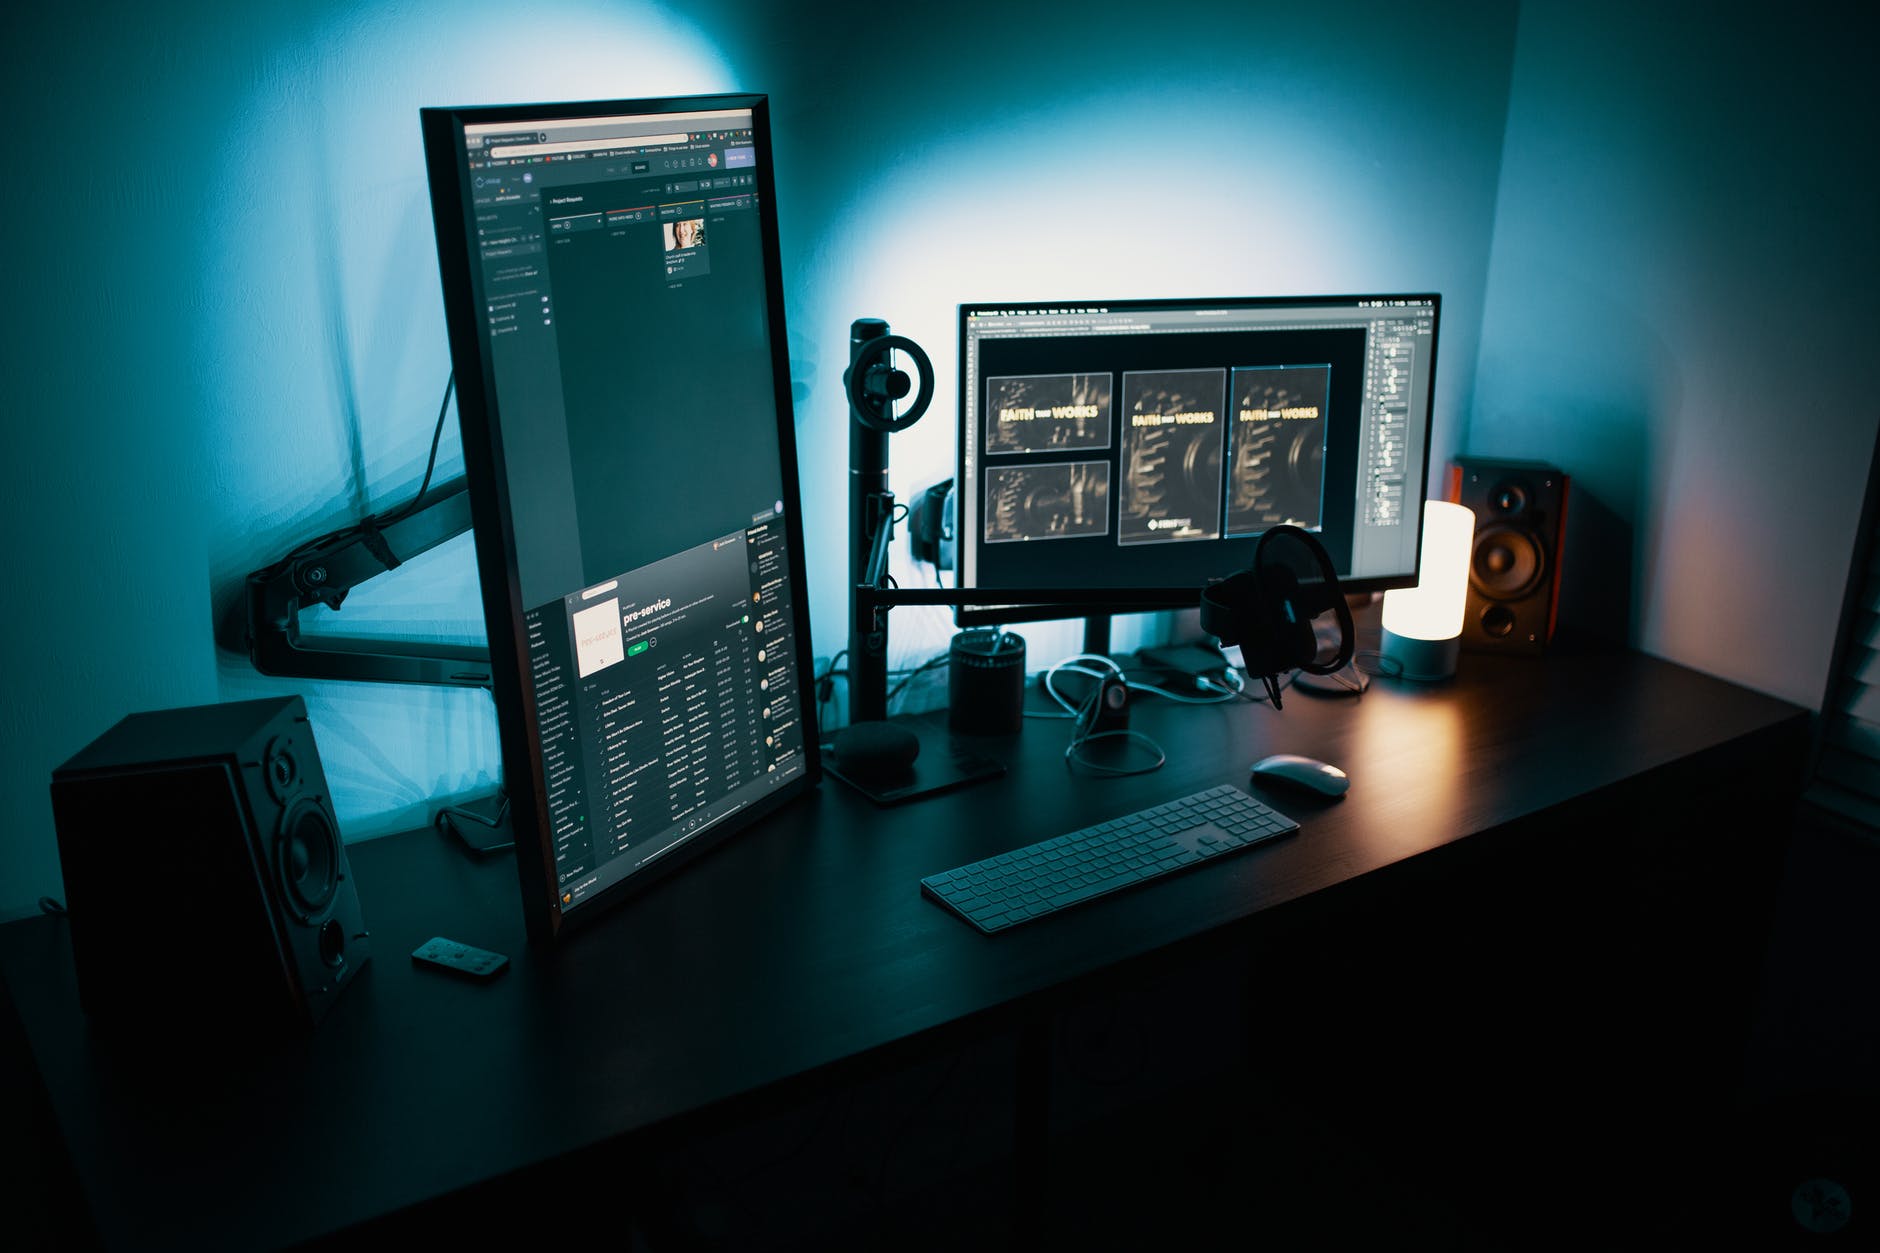 Top 8 Best Vertical Monitors in 2022 - Reviews and Comparison